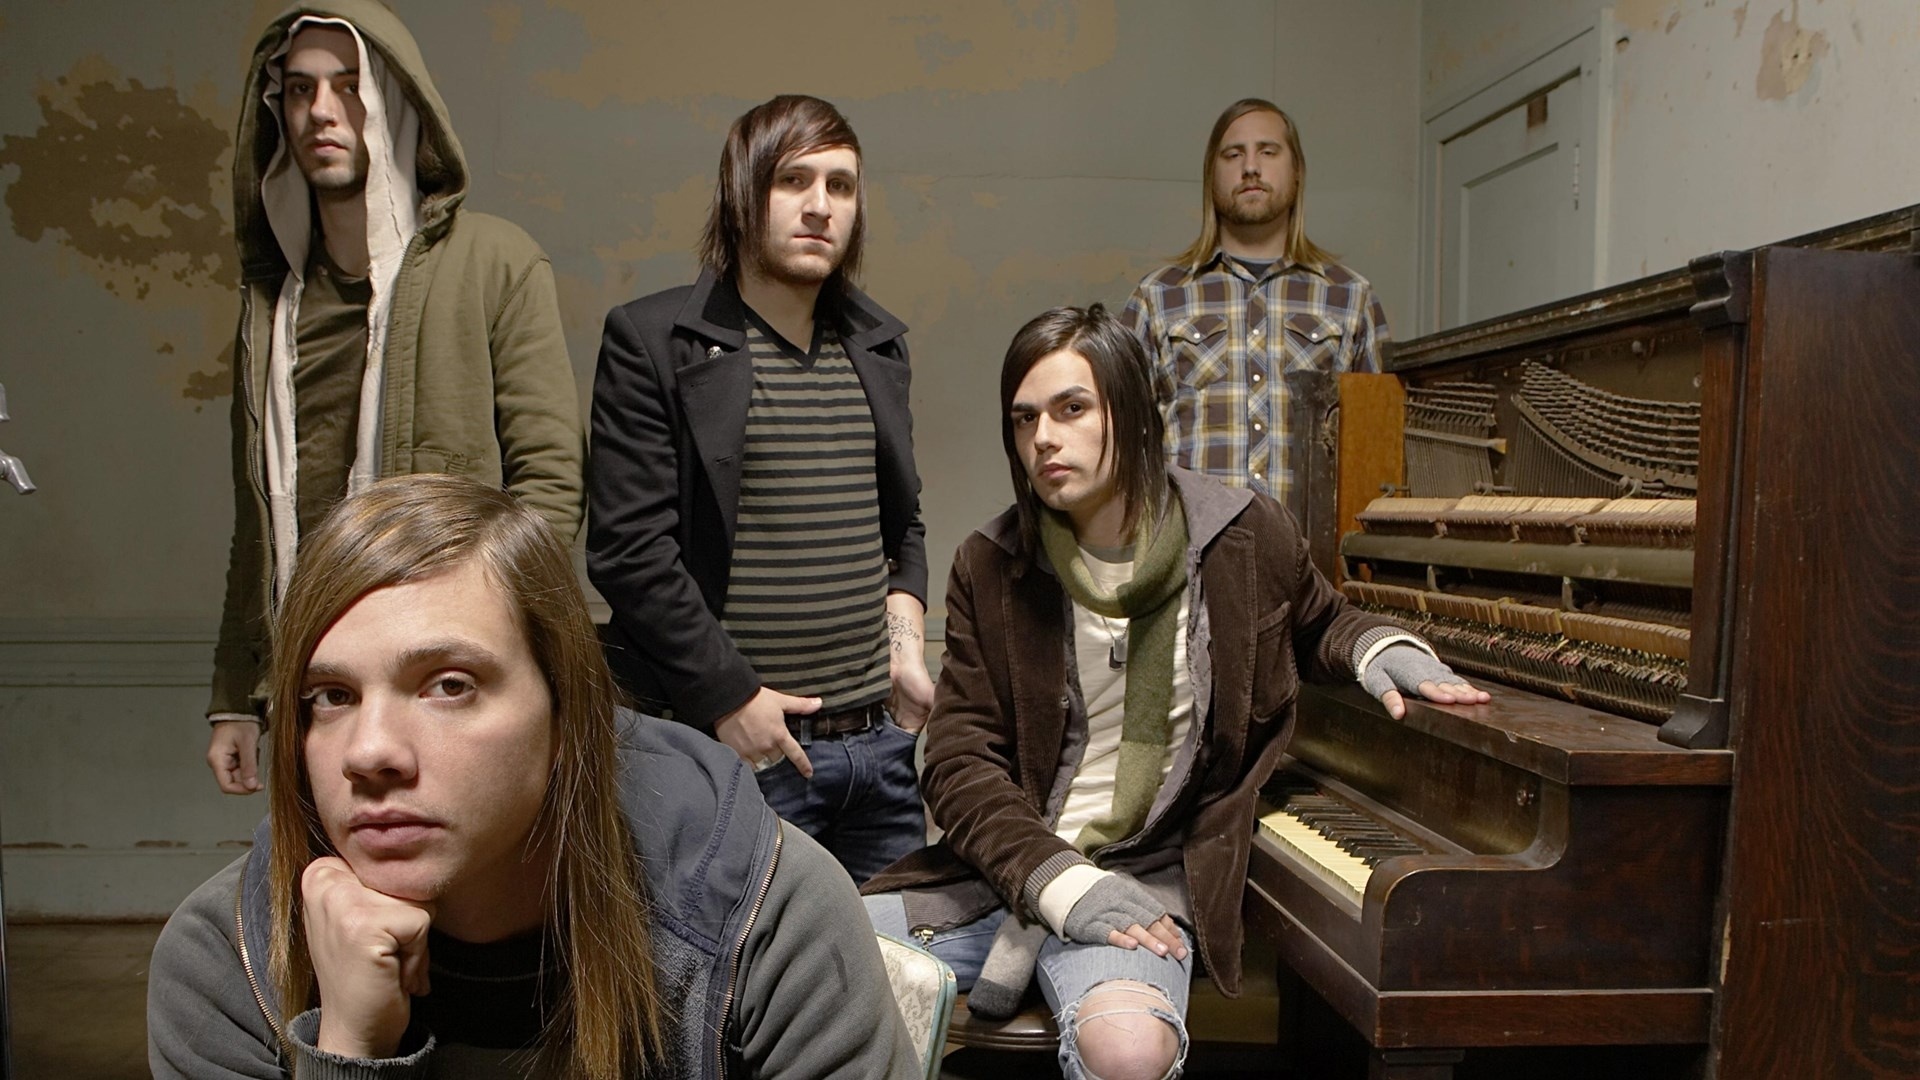 The Red Jumpsuit Apparatus, Band performance, Piano room, Light ambiance, 1920x1080 Full HD Desktop